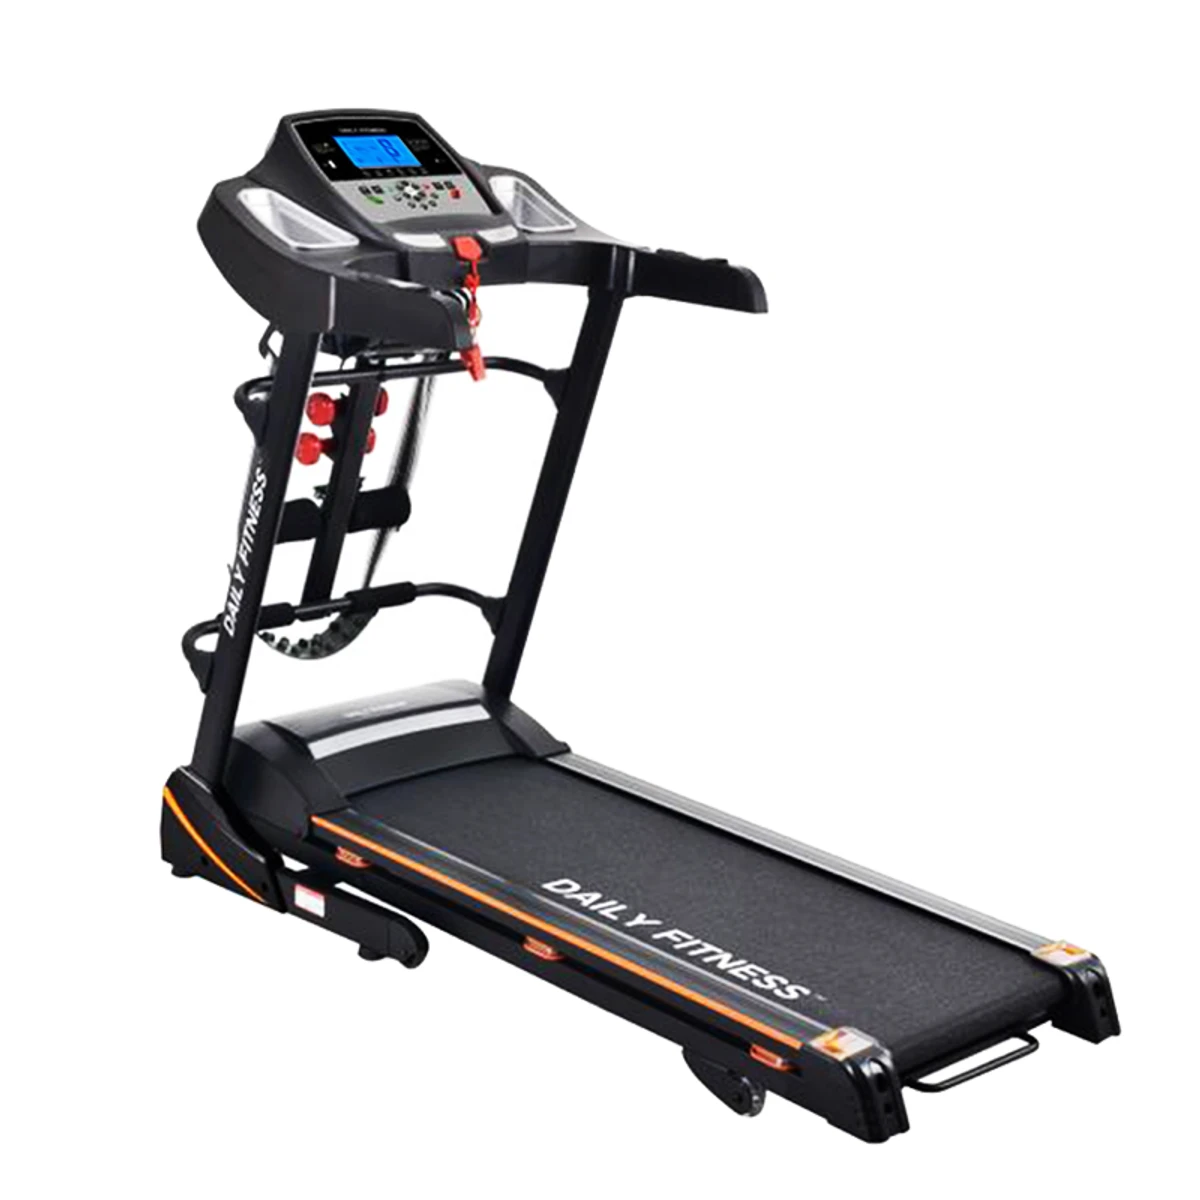 Daily fitness N818DS Multi-function foldable Motorized Treadmill